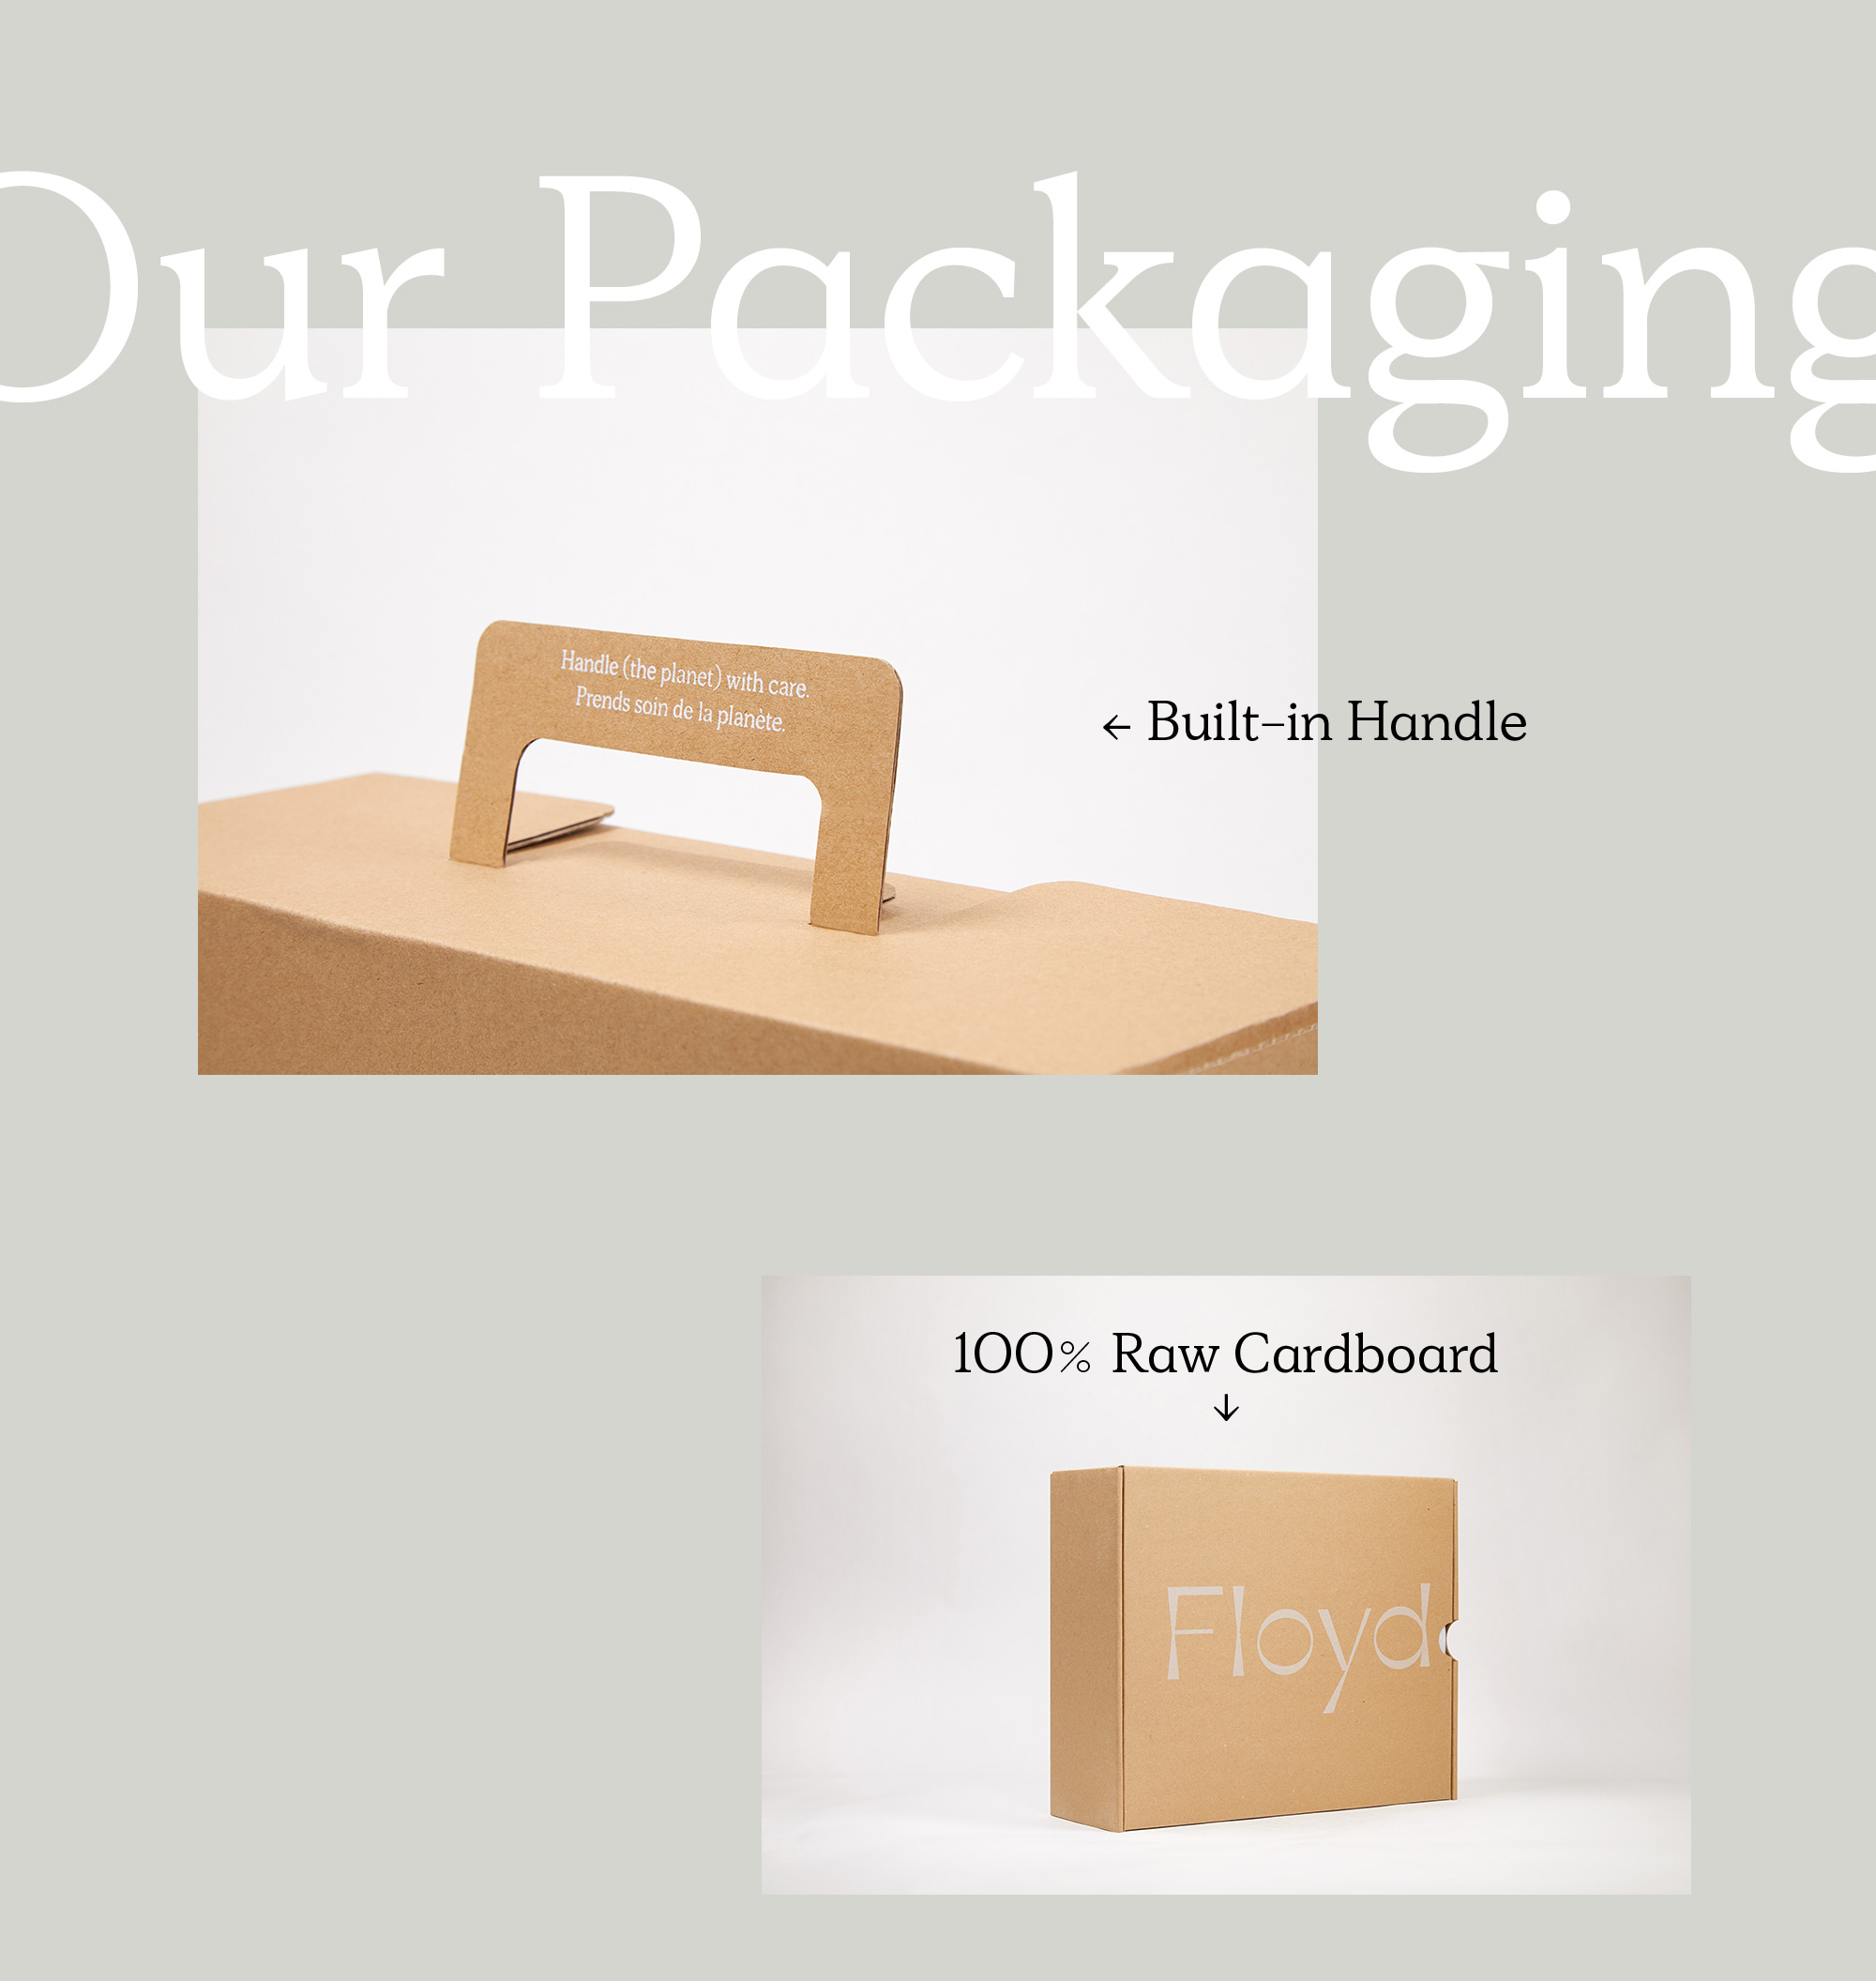 OUR PACKAGING